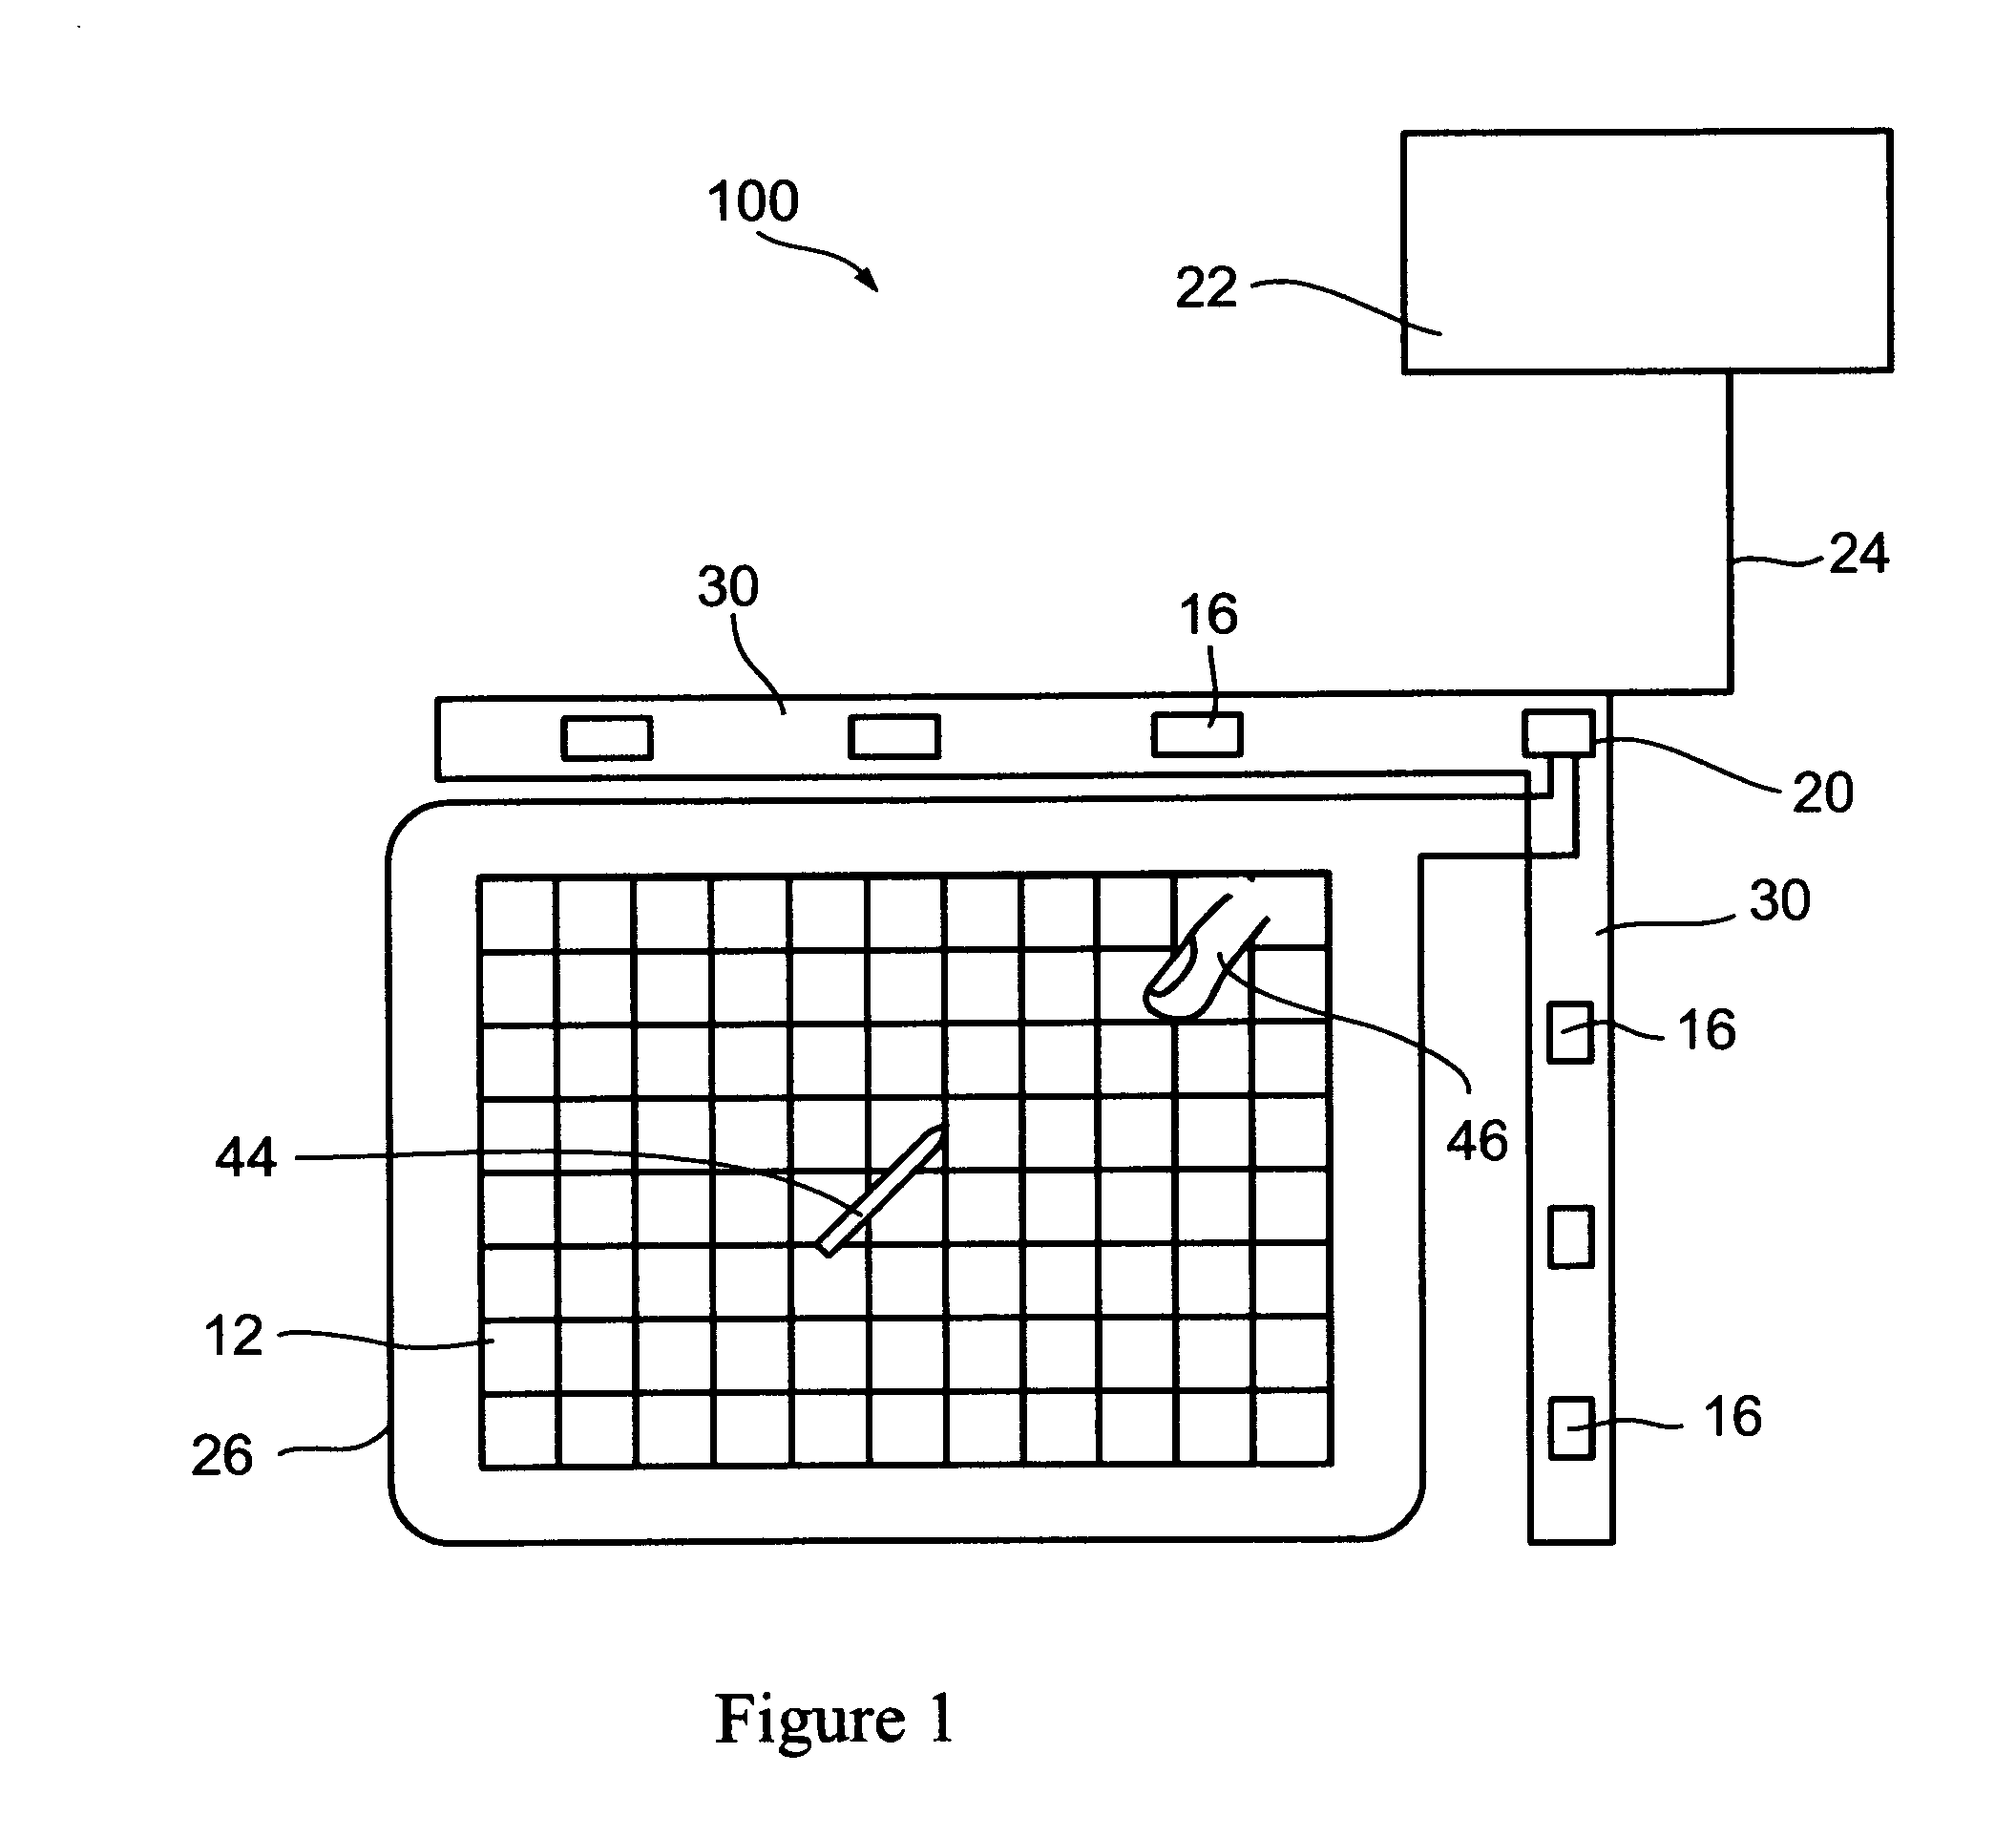 Method for identifying changes in signal frequencies emitted by a stylus interacting with a digitizer sensor